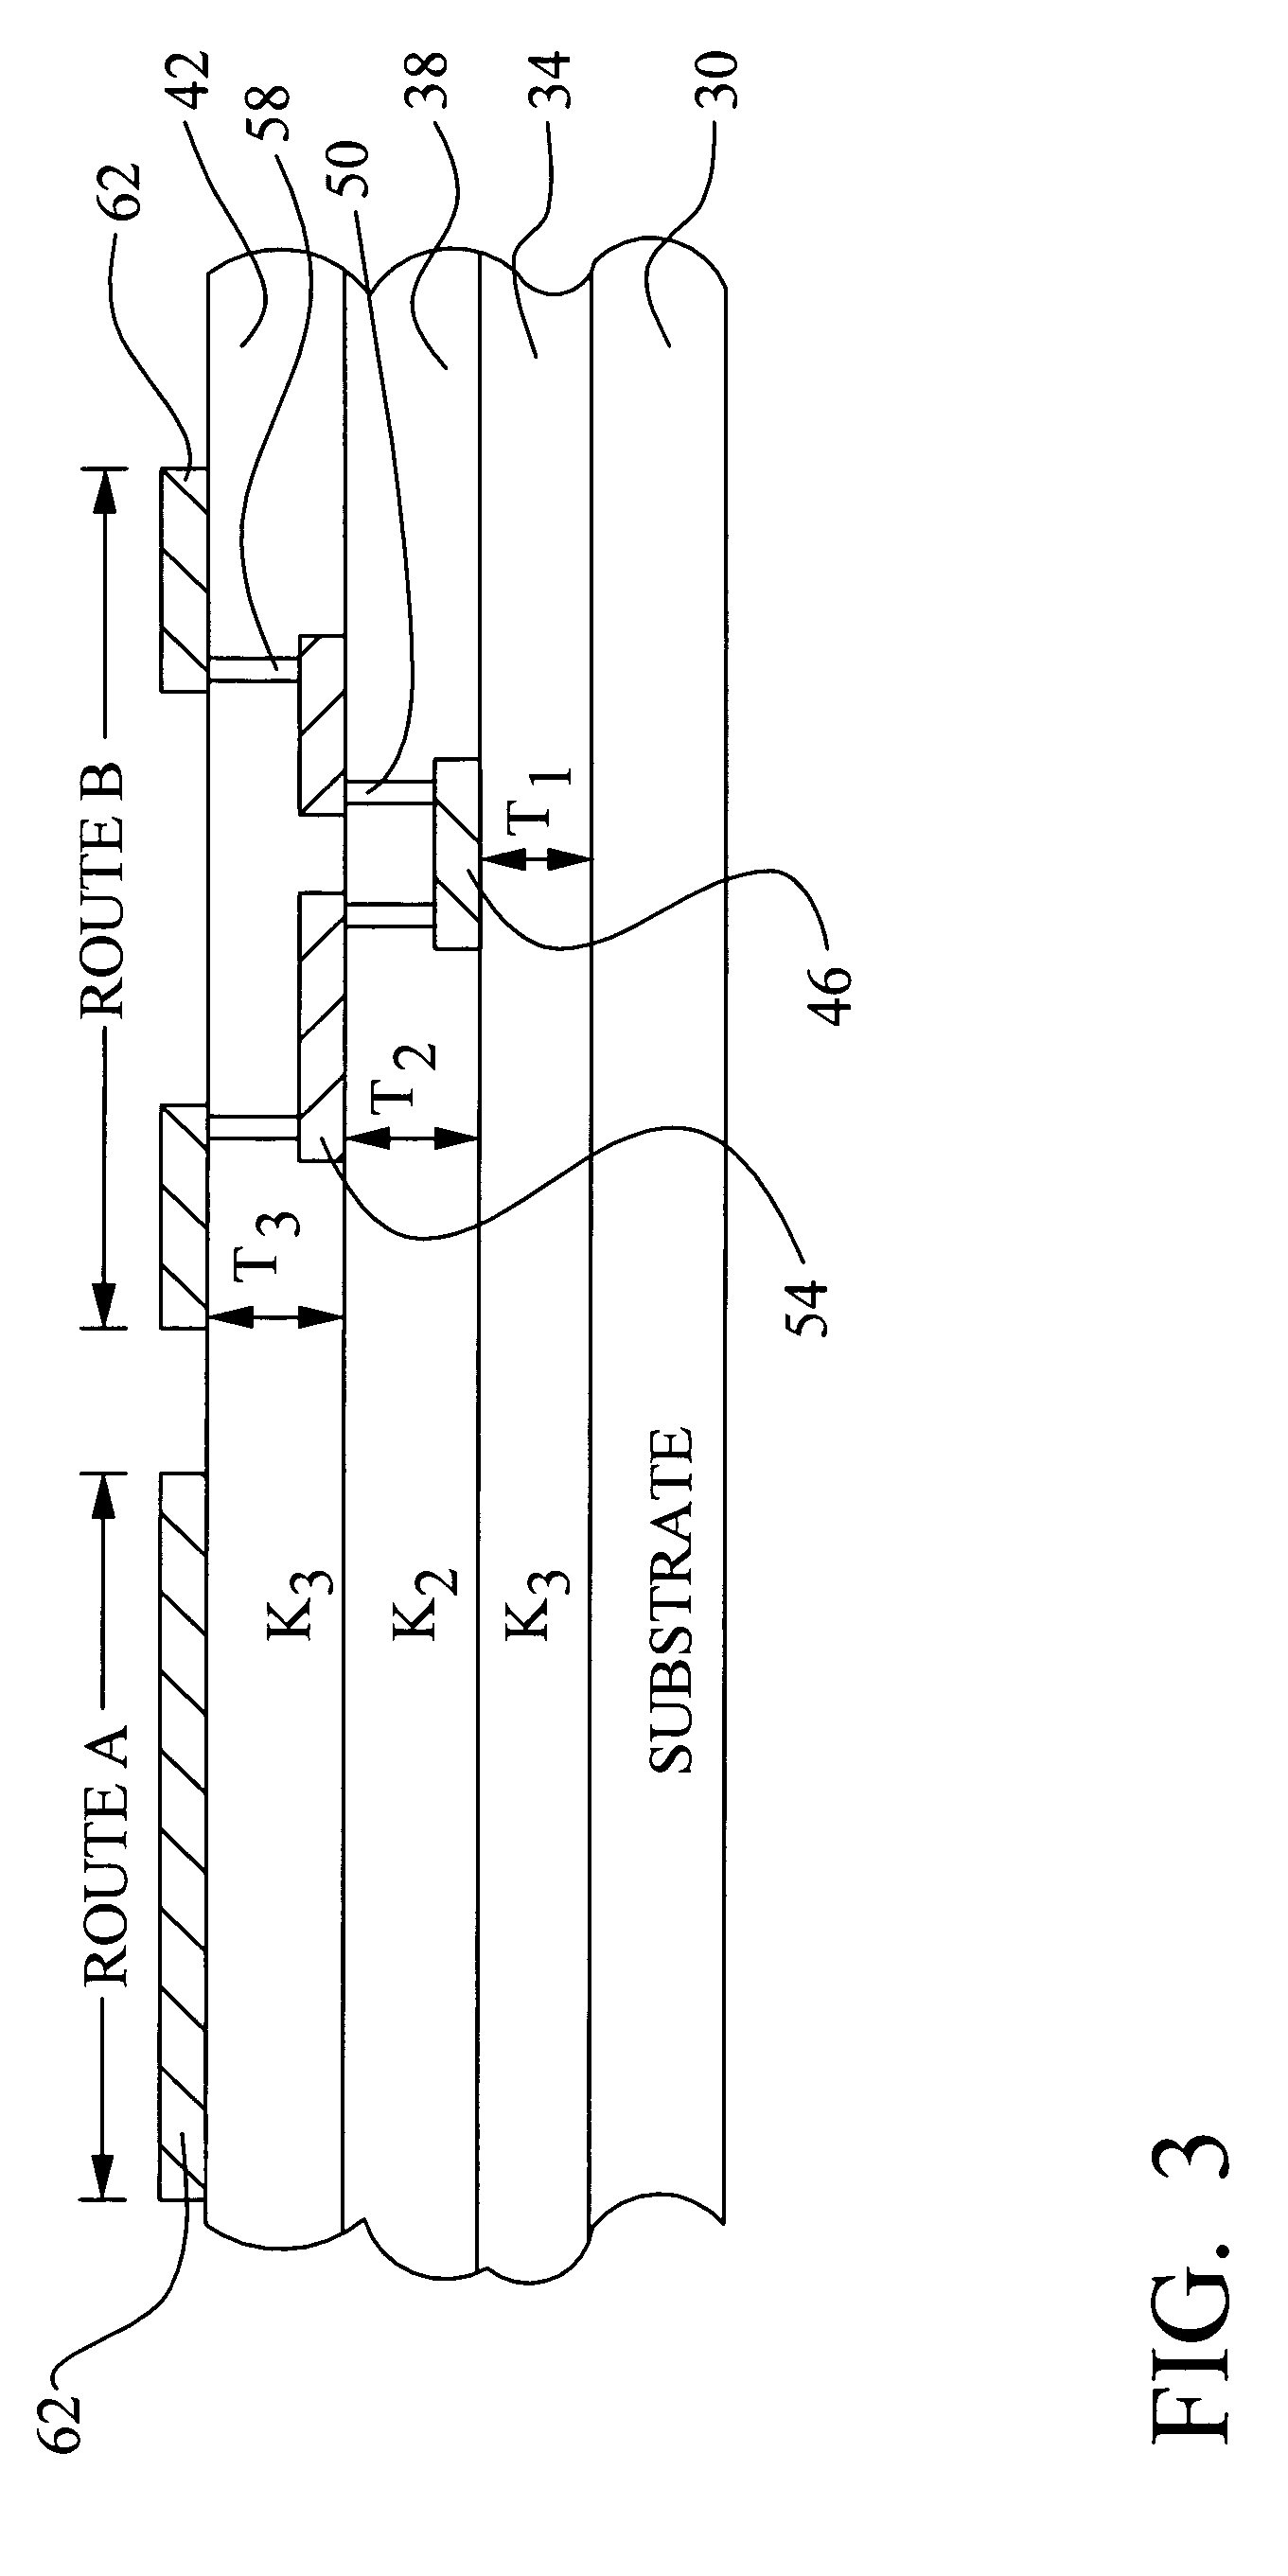 Placement and routing method to reduce Joule heating